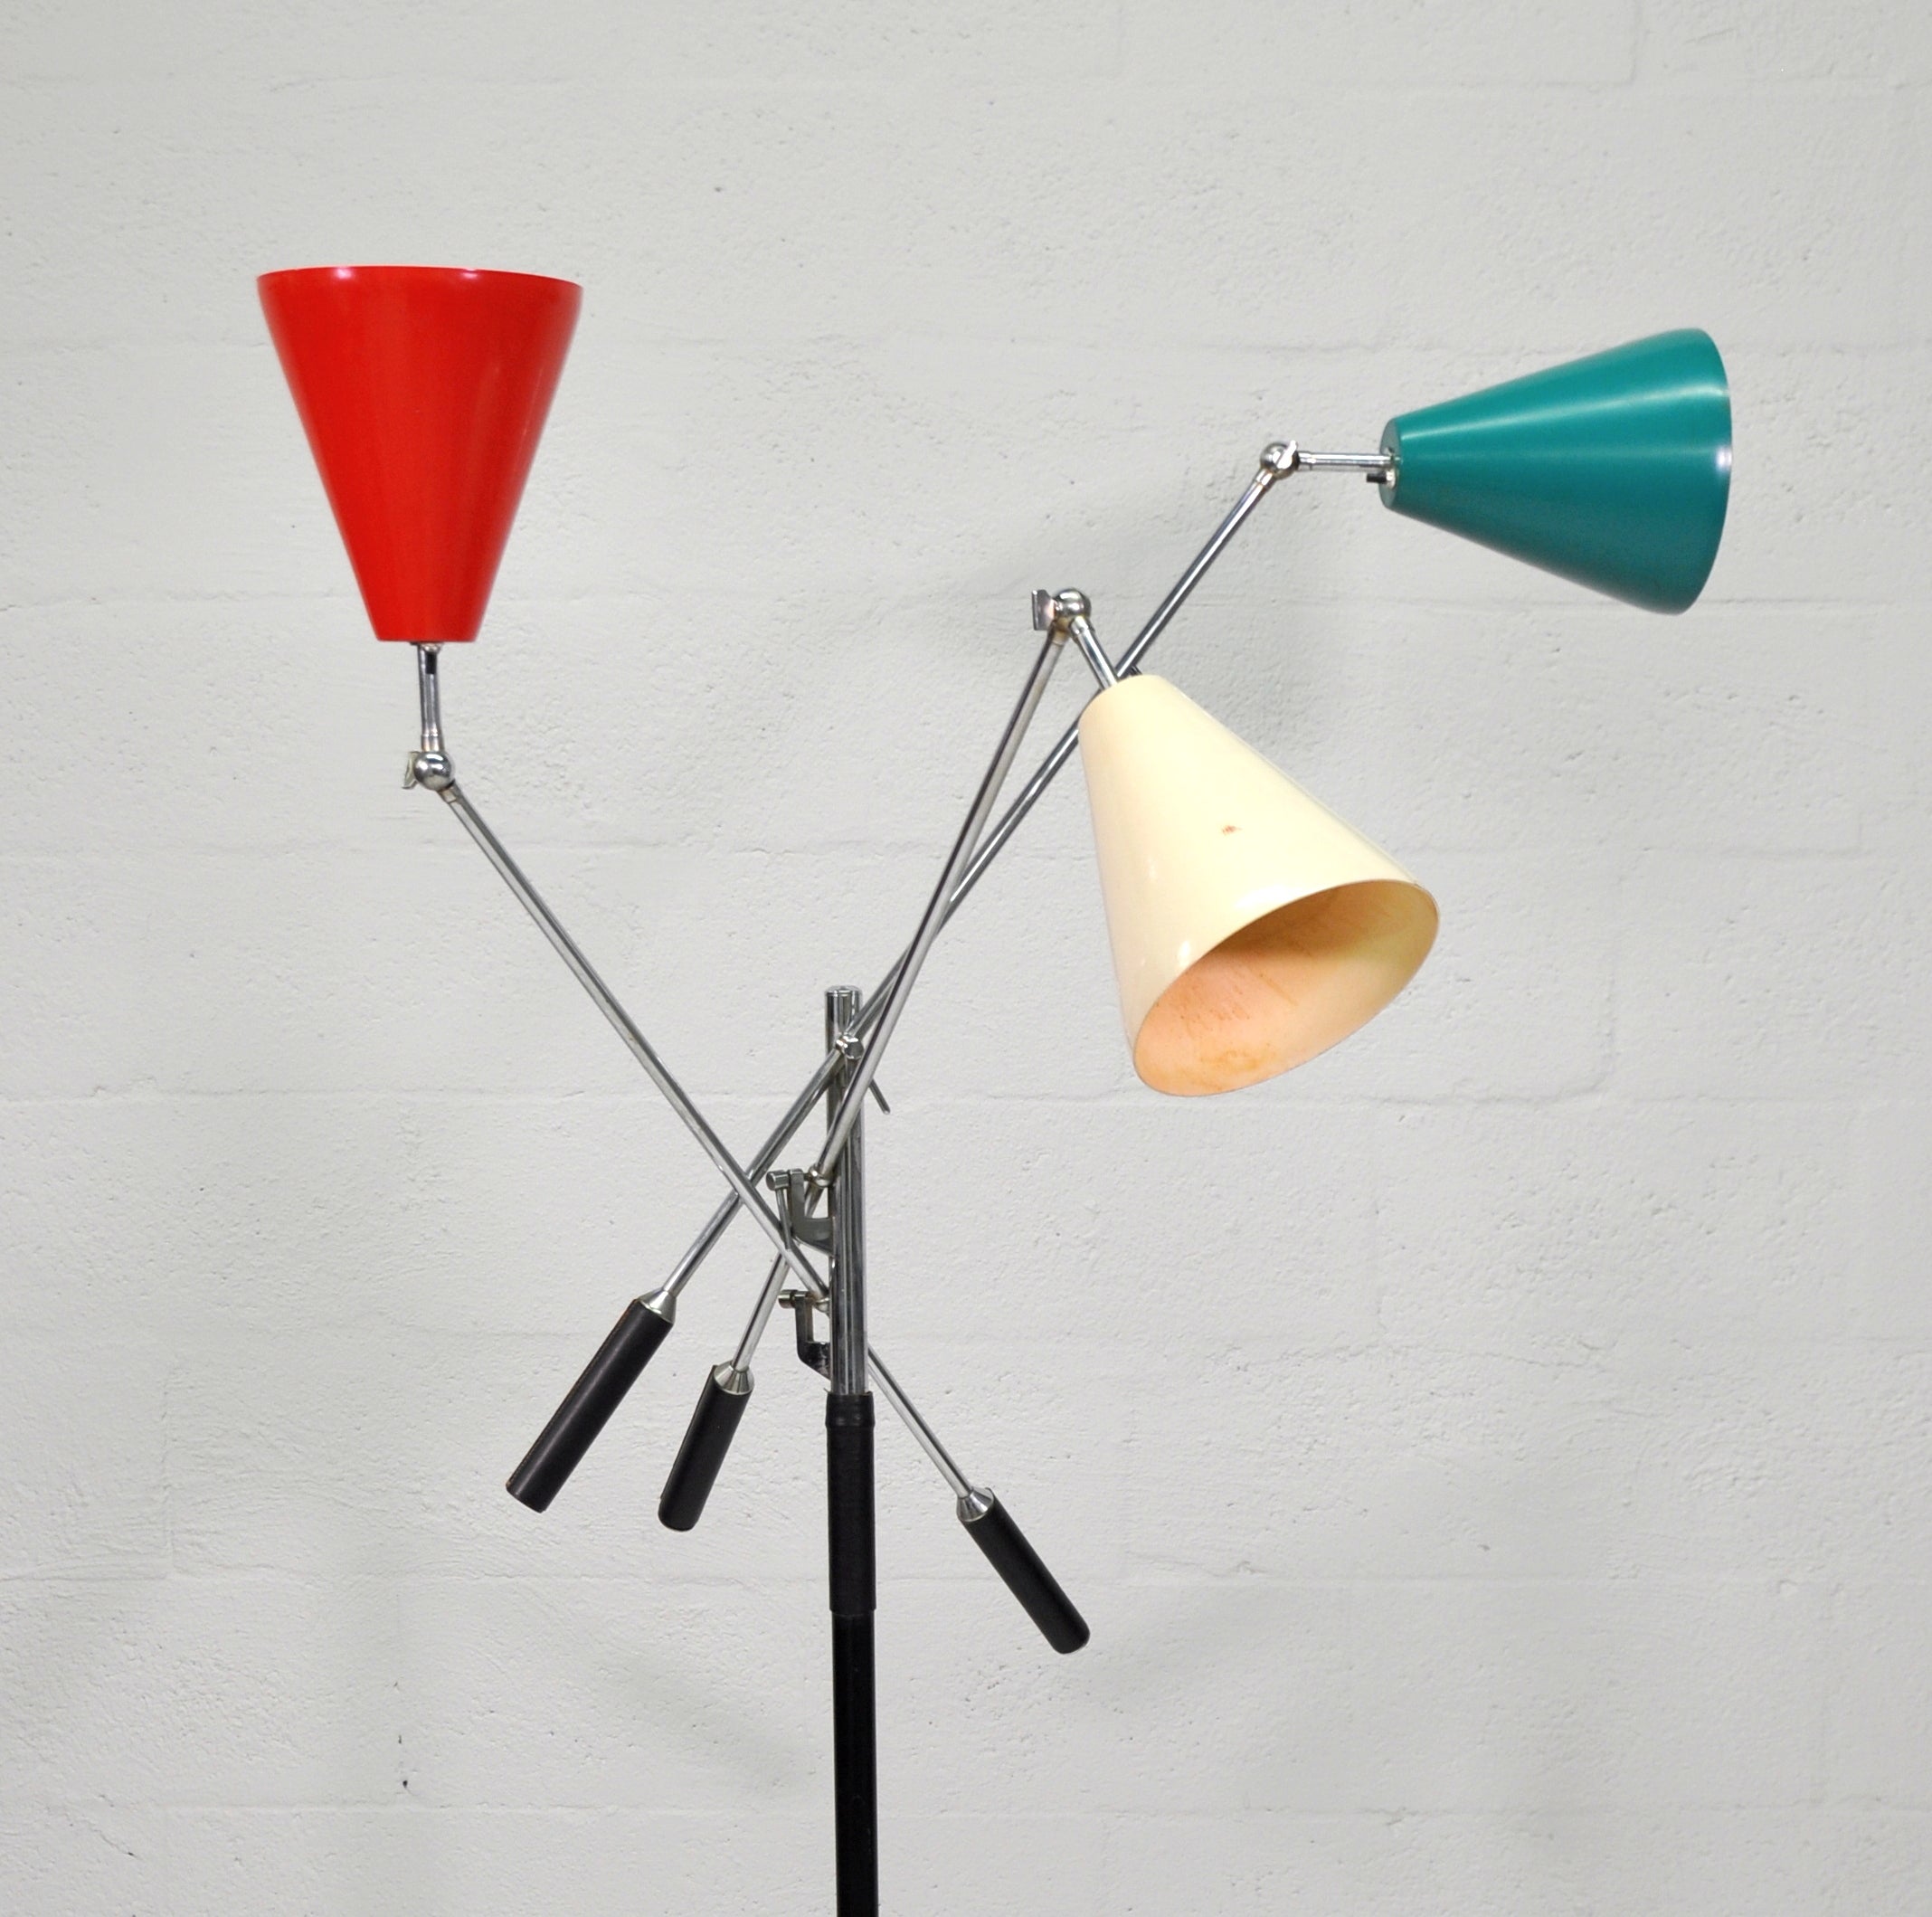 1950s Italian Triennale Floor Lamp by Arredoluce in Chrome, White, Red & Teal For Sale 3